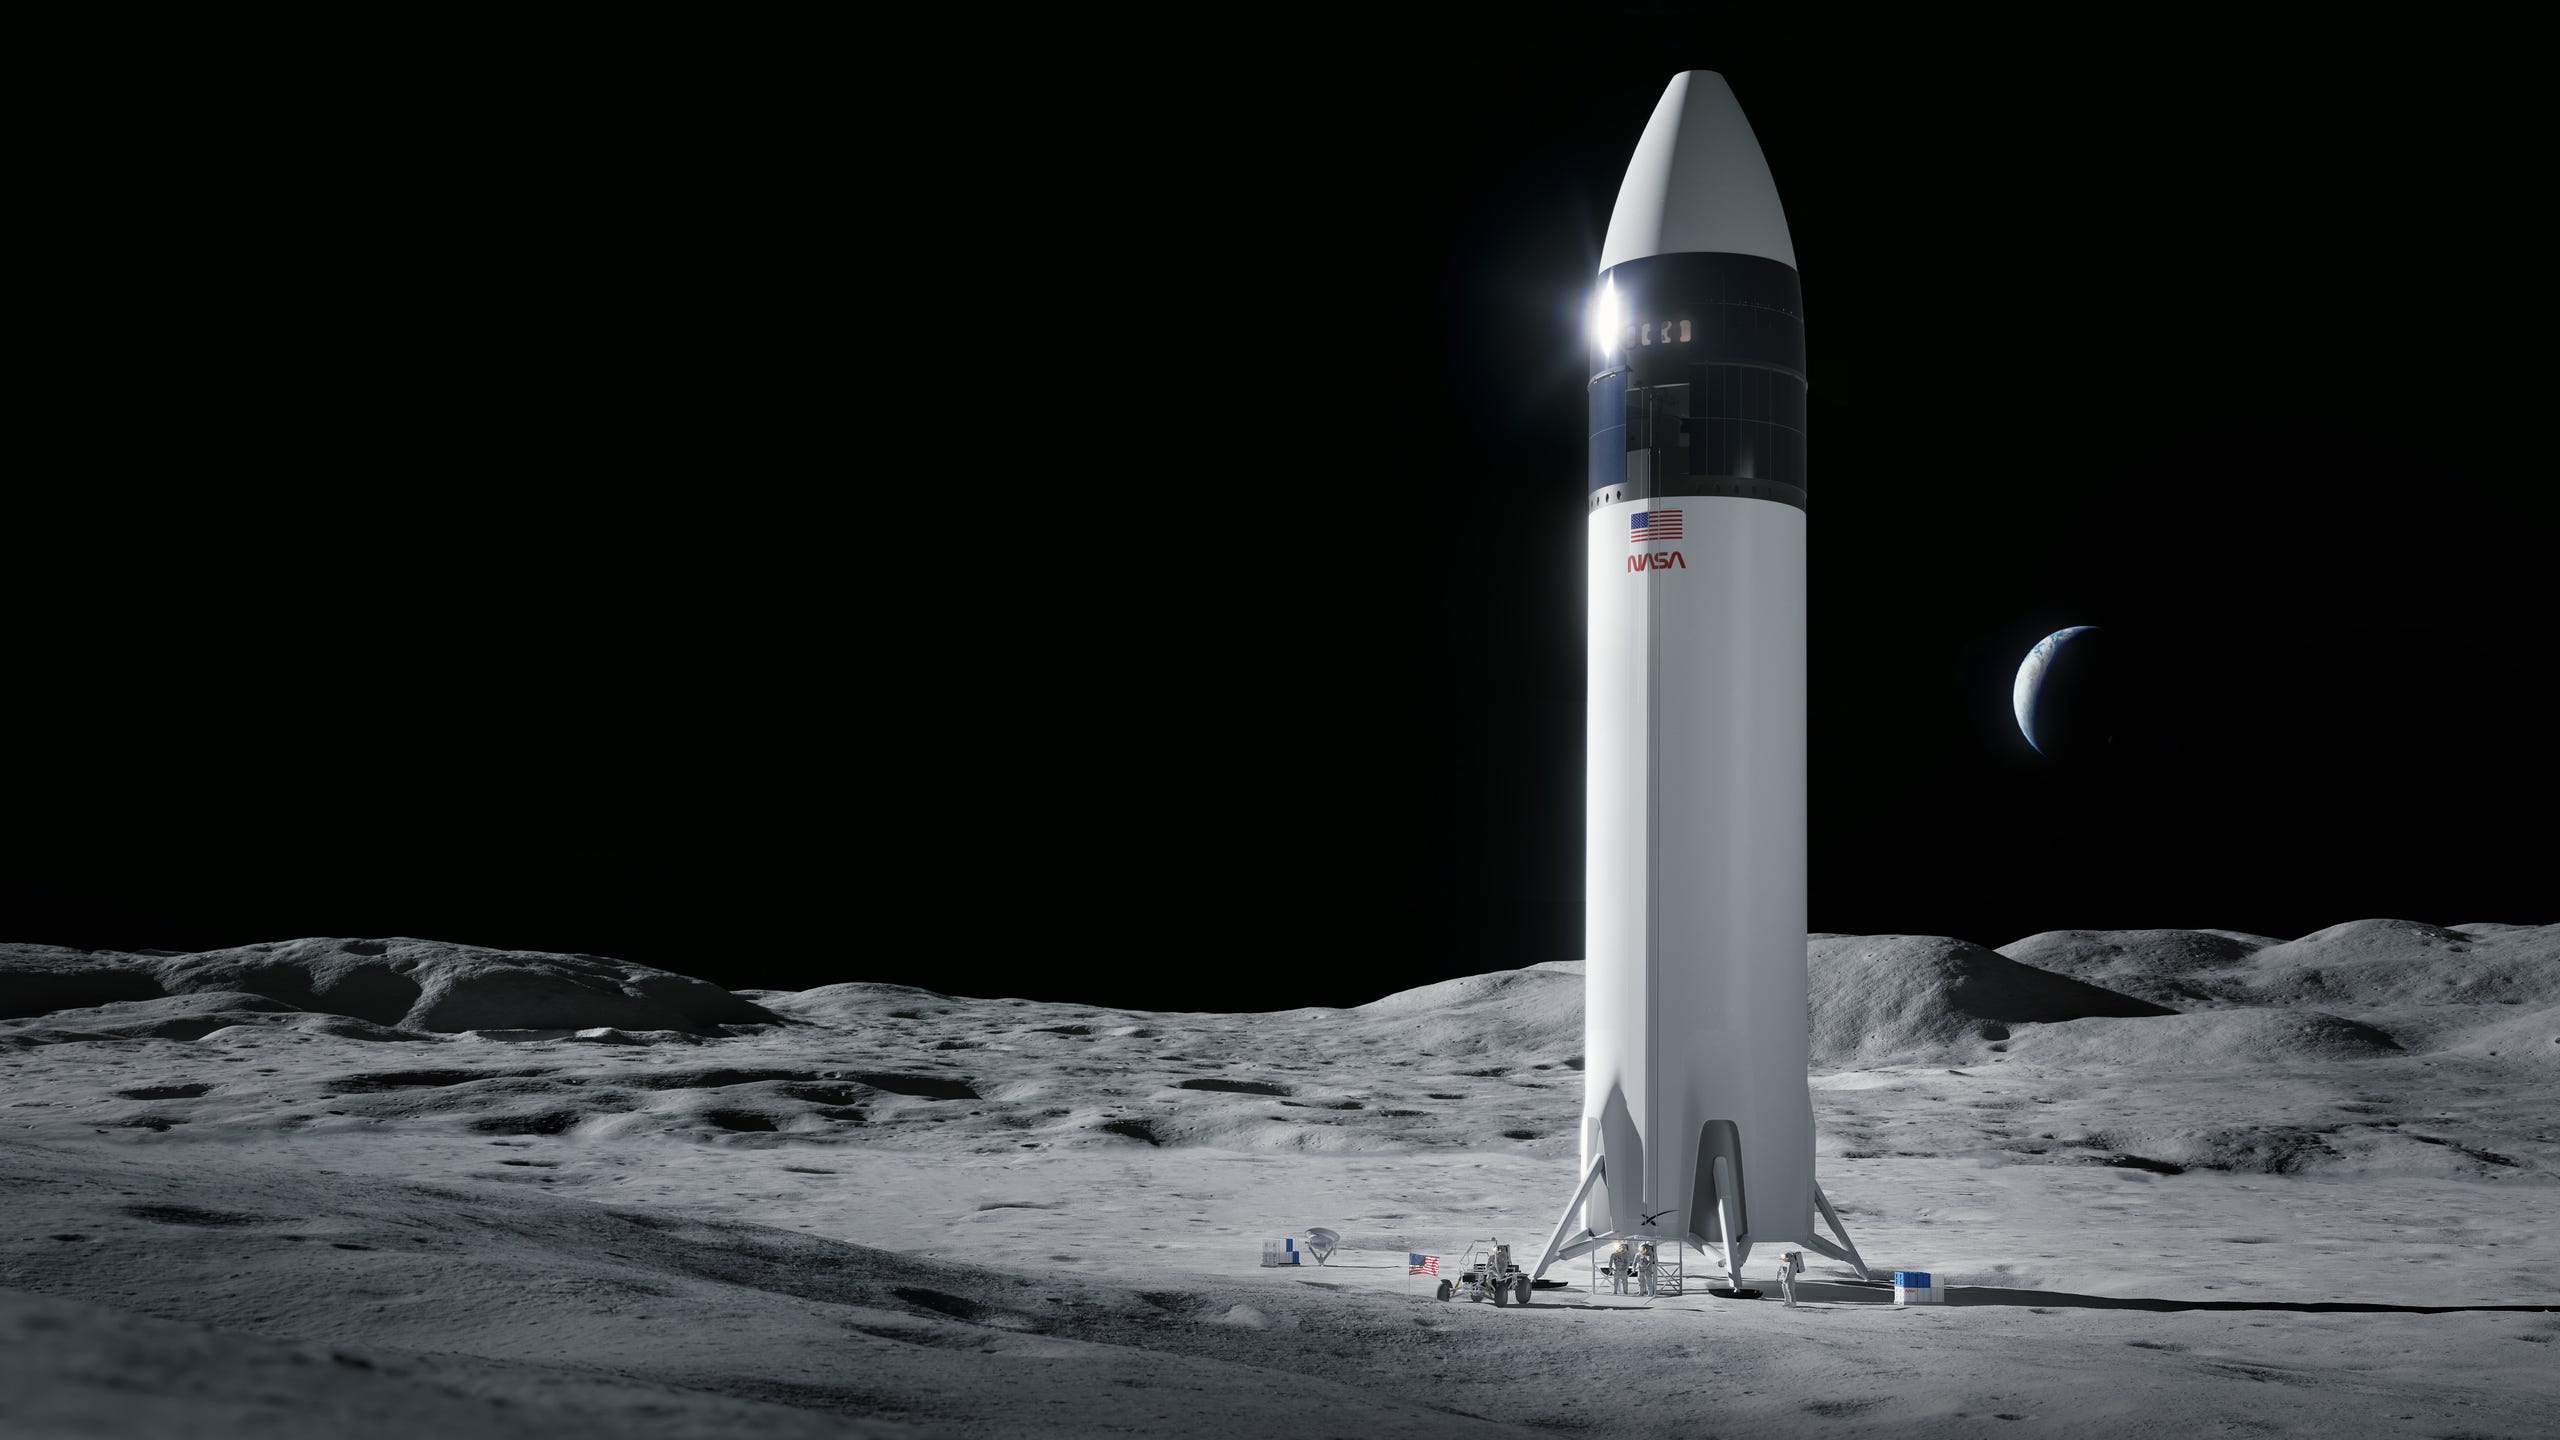 Illustration of SpaceX Starship human lander design that will carry NASA astronauts to the Moon's surface during the Artemis mission.